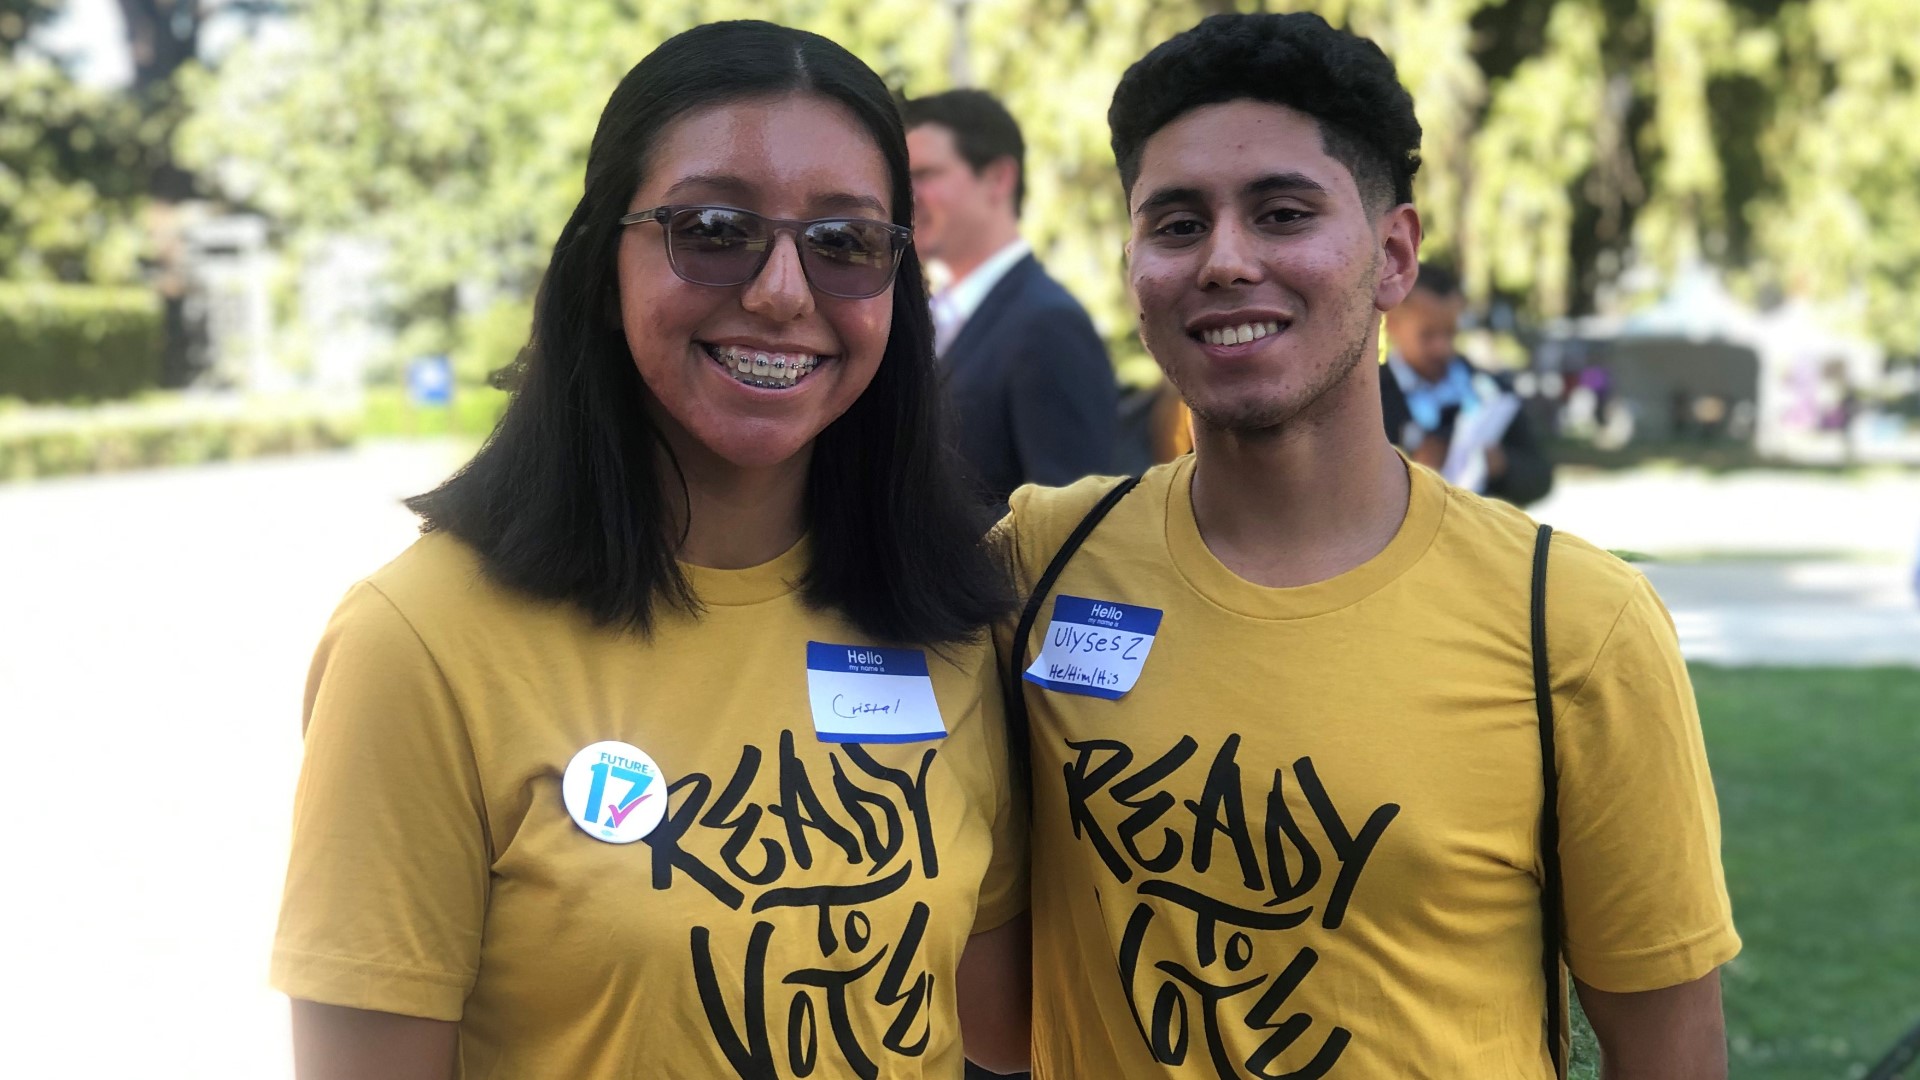 On Tuesday, more than 60 young activists from across the state rallied at the State Capitol in an effort to convince legislators to change the voting age to 17.